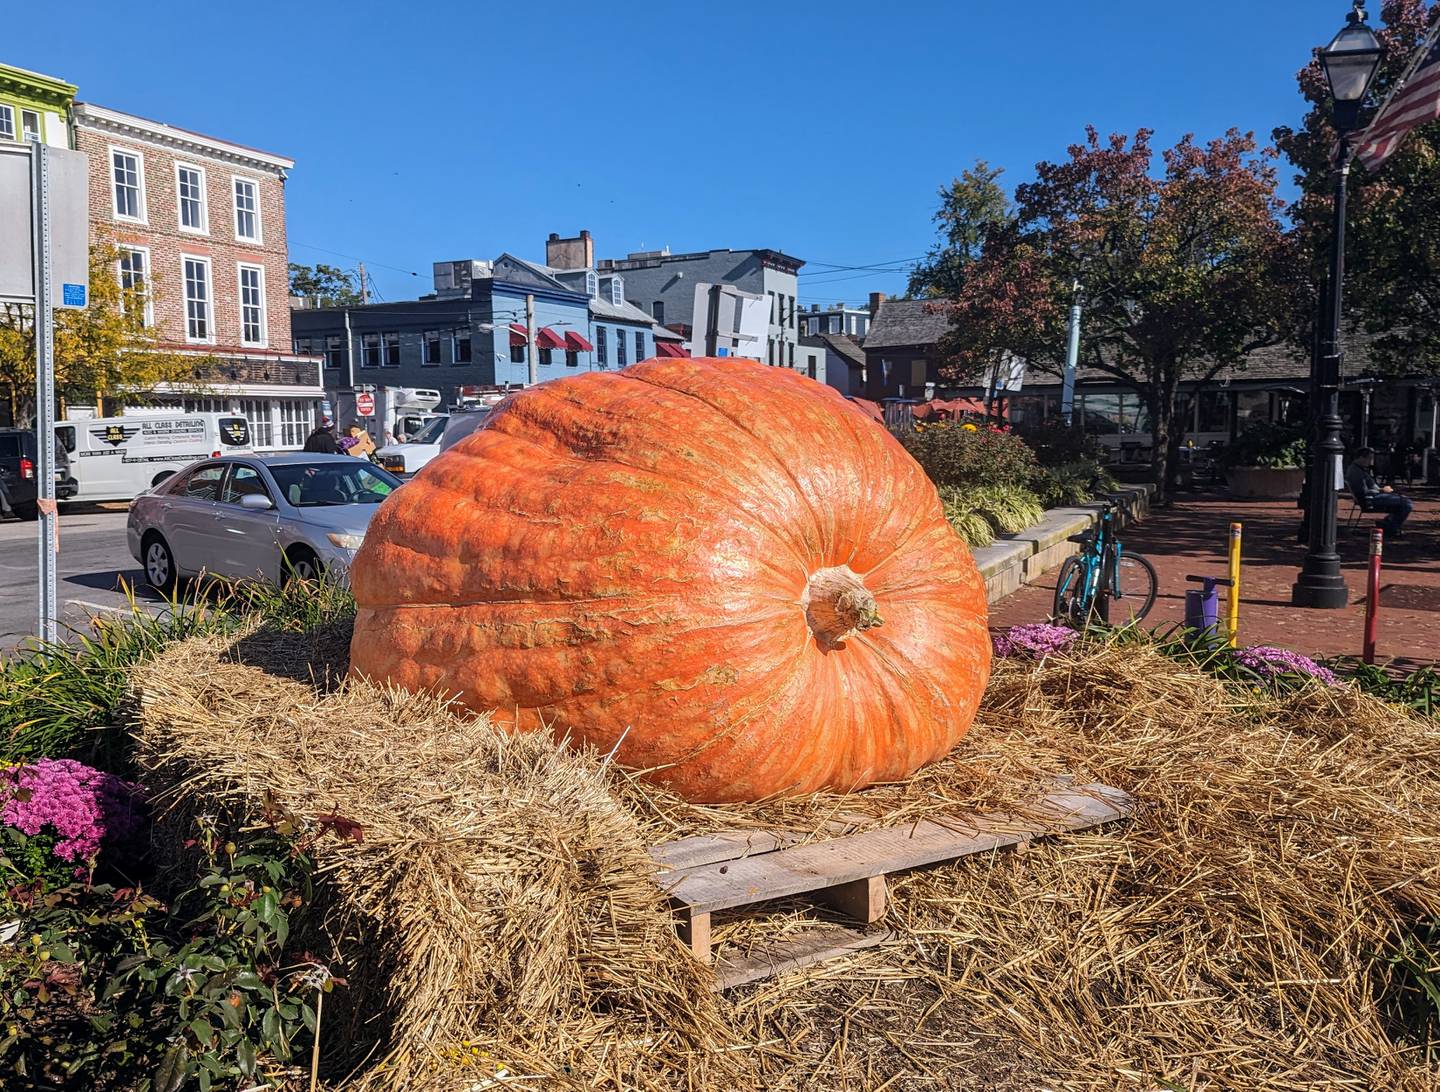 Eight 1,000 pound pumpkins are on display as part of the Great Annapolis Pumpkin selfie contest and tour.